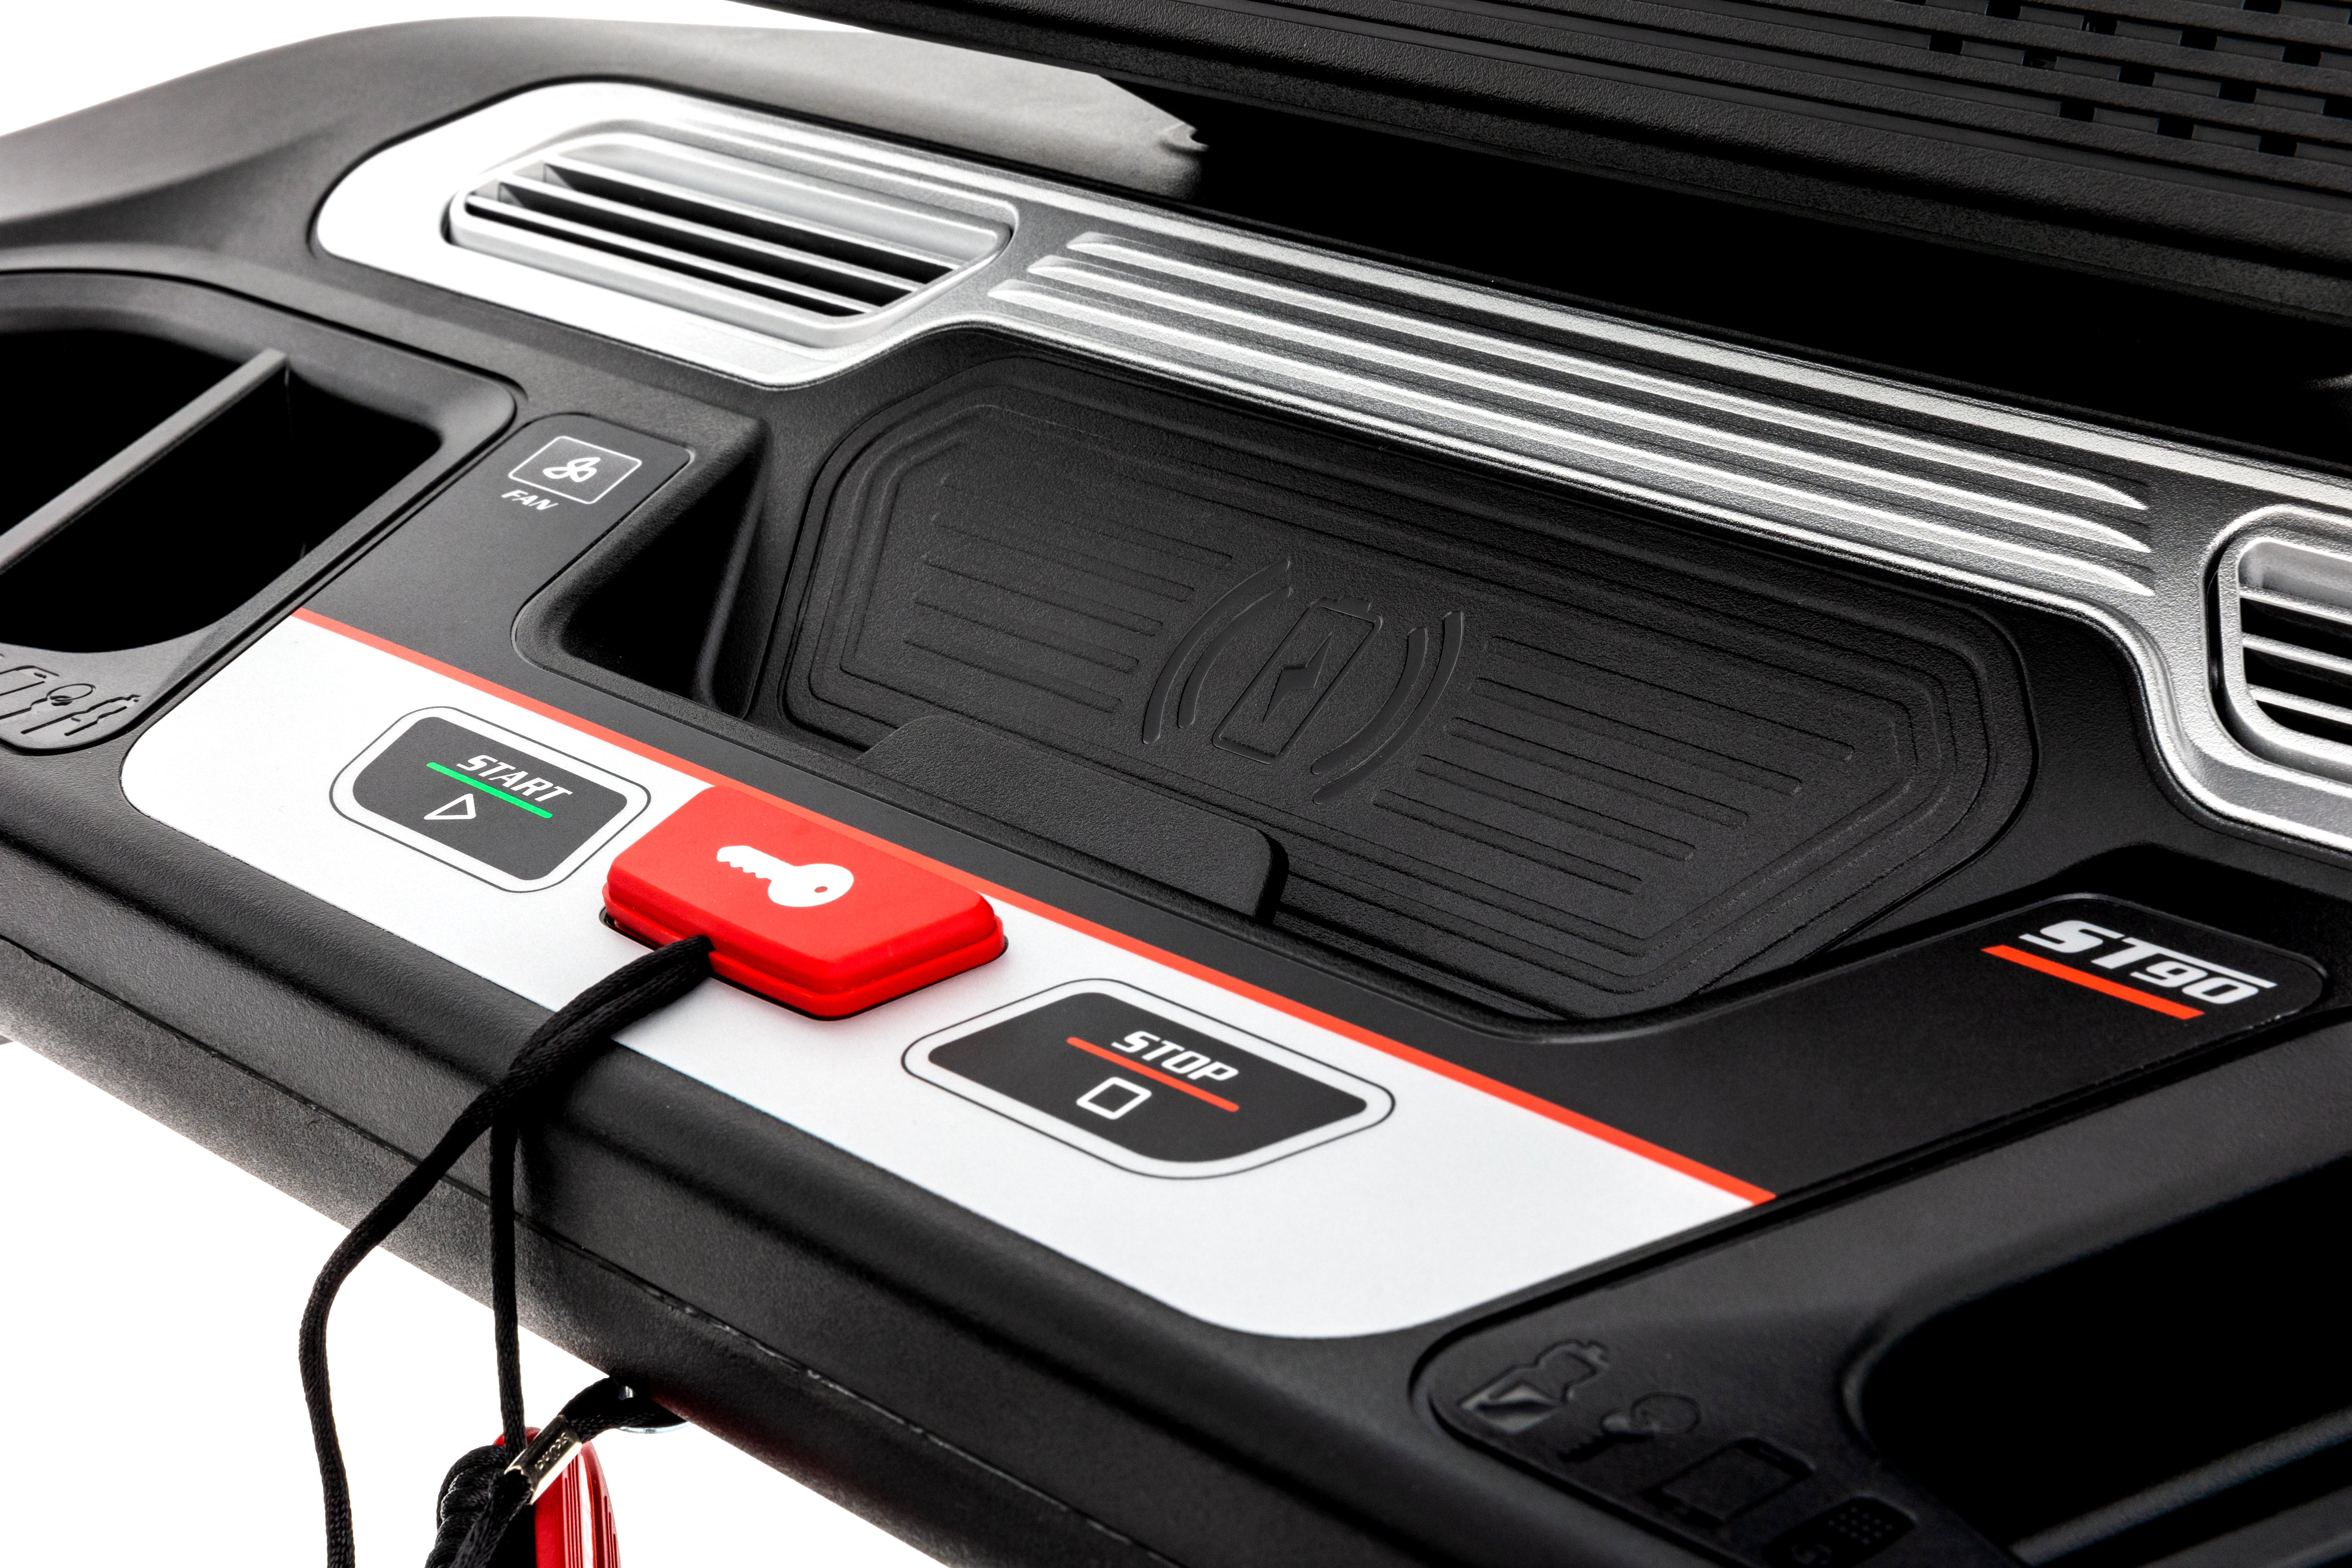 Frontal view of the Sole ST90 treadmill's control interface, highlighting the brand logo, speaker grills, start and stop buttons, and a safety key tether on its polished black and silver surface.